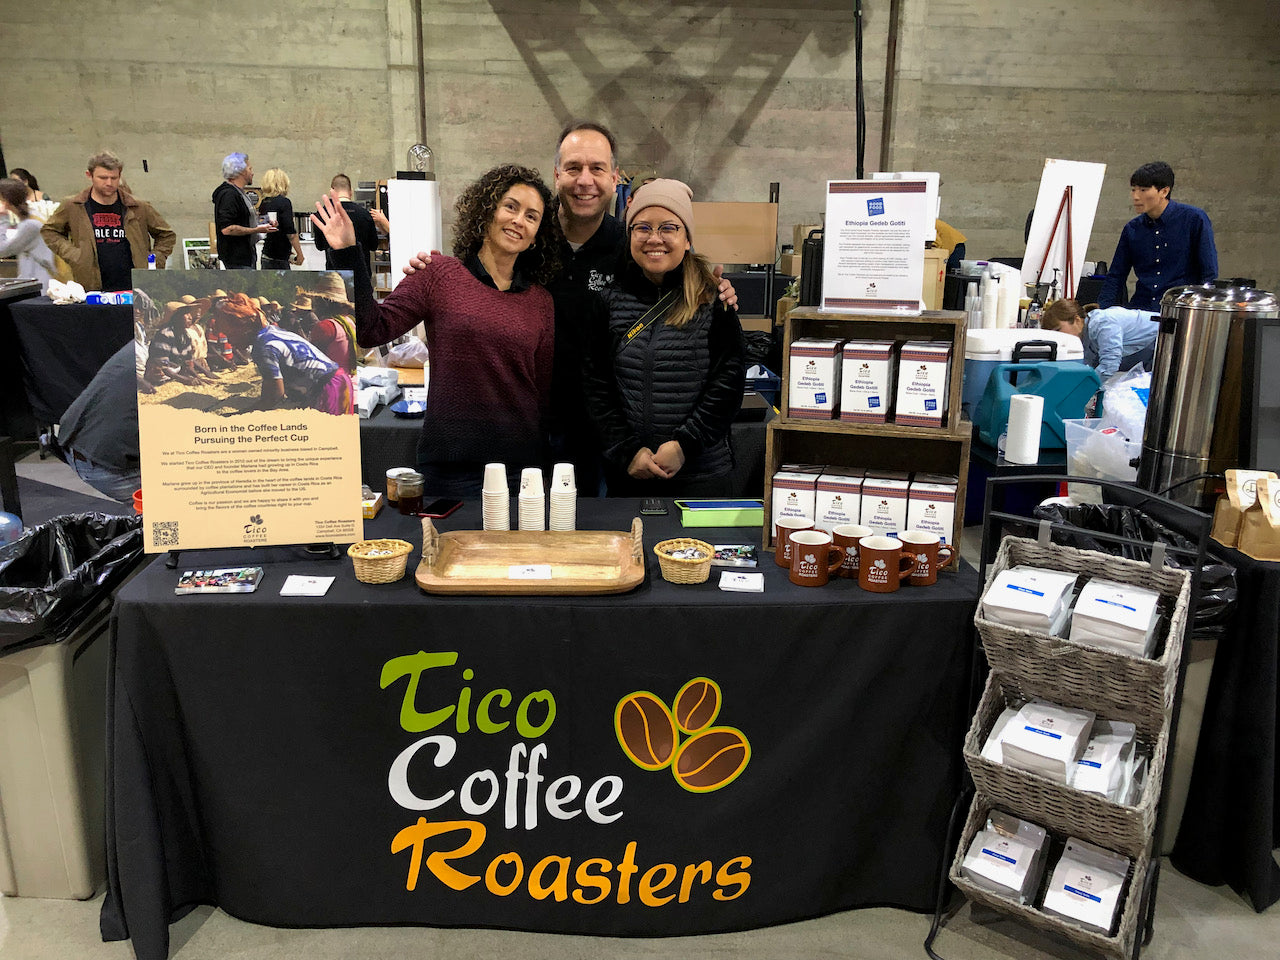 Tico Coffee Roasters booth